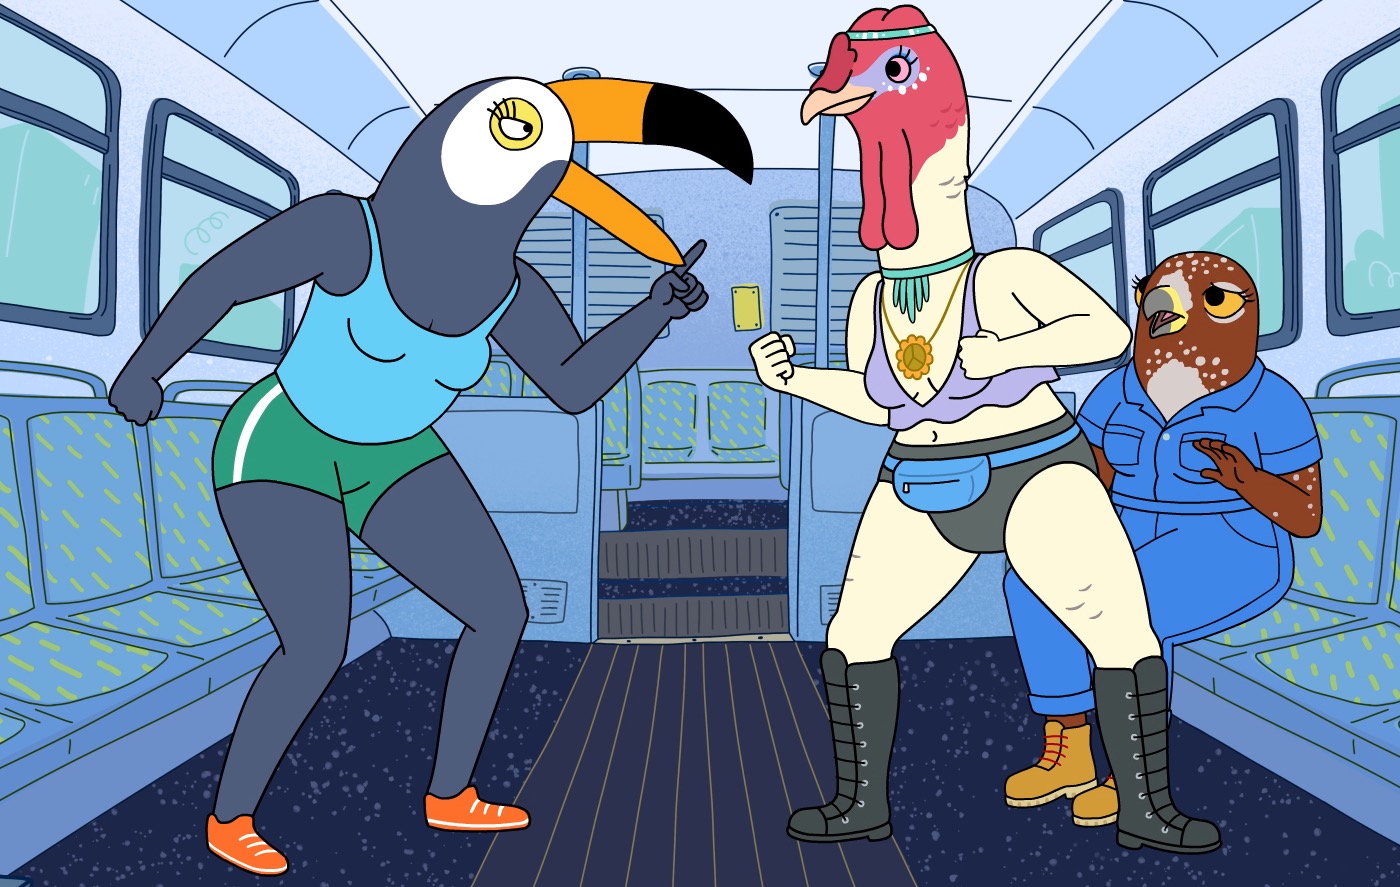 The Second Coming of <i>
<p> </p>
<p><strong>SPIN: It’s well known that Netflix doesn’t share viewership information, which is very frustrating for creators. Were you surprised that <em>Tuca & Bertie</em> got canceled only two months after it premiered, or did you see it coming?</strong><br />
<strong>Lisa Hanawalt:</strong> No, I was surprised. They made that decision much quicker than after two months, right? We were only able to tell people then. I felt very confident that we delivered a really good show — based on the critical response and feedback from people who were watching the show. It really seemed like it was connecting with people. We were definitely blindsided.</p>
<p><strong>It’s been pointed out that it was a bad look for Netflix to cancel a show with two women of color as the leads so quickly after it premiered.</strong><br />
I mean, I would like it to not be remarkable that the show features women or has a cast with people of color in it. That shouldn’t be the most important thing about the show. But that’s the landscape we’re in right now, that it still seems remarkable or rare for some reason, which is kind of a bummer. I would like more shows to have that demographic. I think more and more are coming out, but they don’t always get as big of a chance as those shows with more traditional white male creators.</p>
<p><strong>For now the show will be released week to week, and there are a little more restrictions on Adult Swim than on Netflix. Has that changed the way you’ve approached making the show?</strong><br />
Not really, I’ve always liked the show to have an episodic feel in addition to having the larger story arcs go throughout the entire season. I want each episode to feel special so that you can drop in at any moment and understand the self-contained little story of the episode. So I just leaned into that a little harder, knowing that it would come out weekly.</p>
<p><strong>Where did the idea for the show come from? Was it something you came up with as <em>BoJack Horseman</em> was winding down, or has it been percolating in your mind before that?</strong><br />
I had made this webcomic about Tuca for Hazlitt and Bertie kind of came out of this comic I did for Lucky Peach, where I made a comic about a bird couple getting a new house, so those characters turned into Bertie and Speckle. And just at some point while working on <em>BoJack</em>, Raphael started asking me if I had an idea for my own show, and I had been starting to think about it a little bit. So then we just talked about it for a few years and very slowly developed this idea.</p>
<p> </p>
<img src=